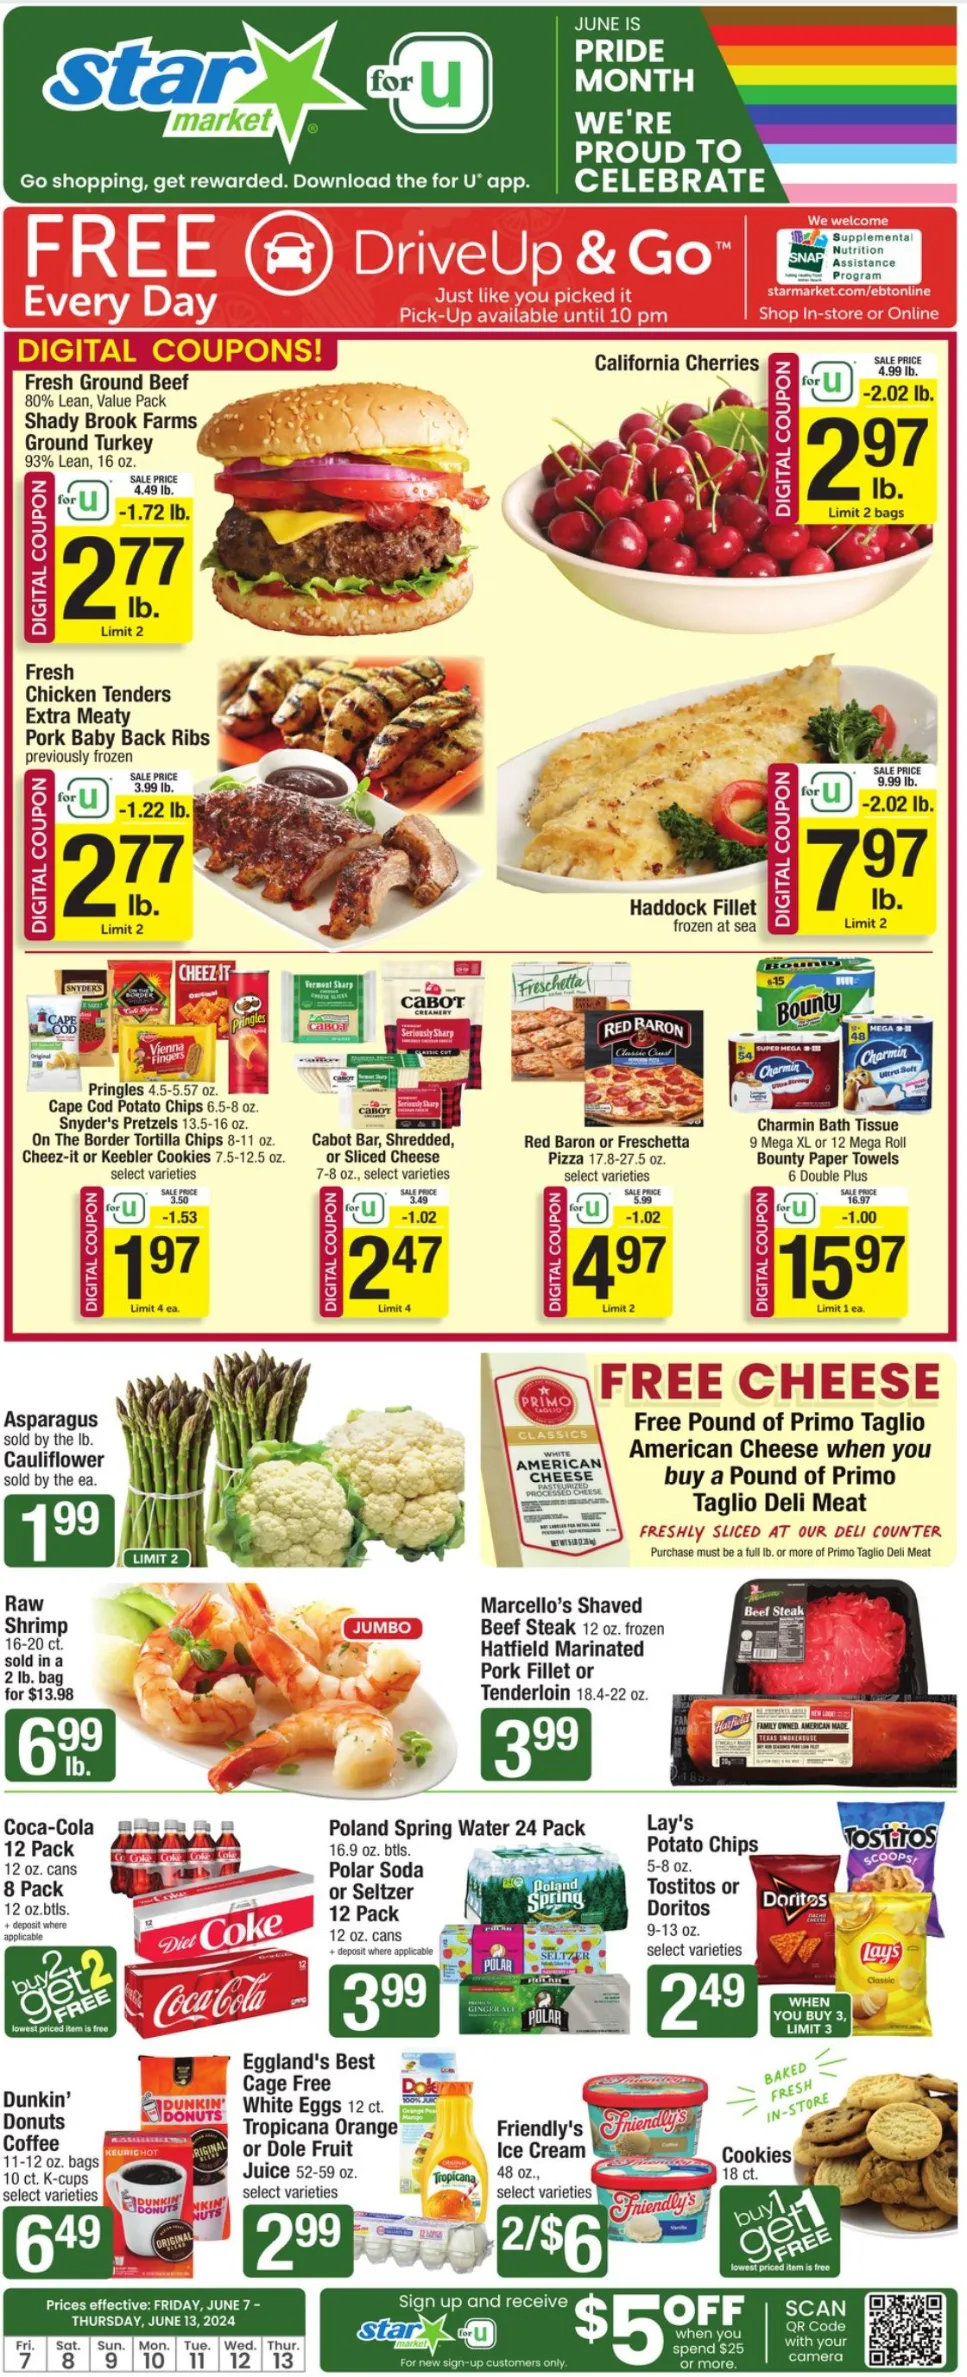 Star Market July 2024 Weekly Sales, Deals, Discounts and Digital Coupons.